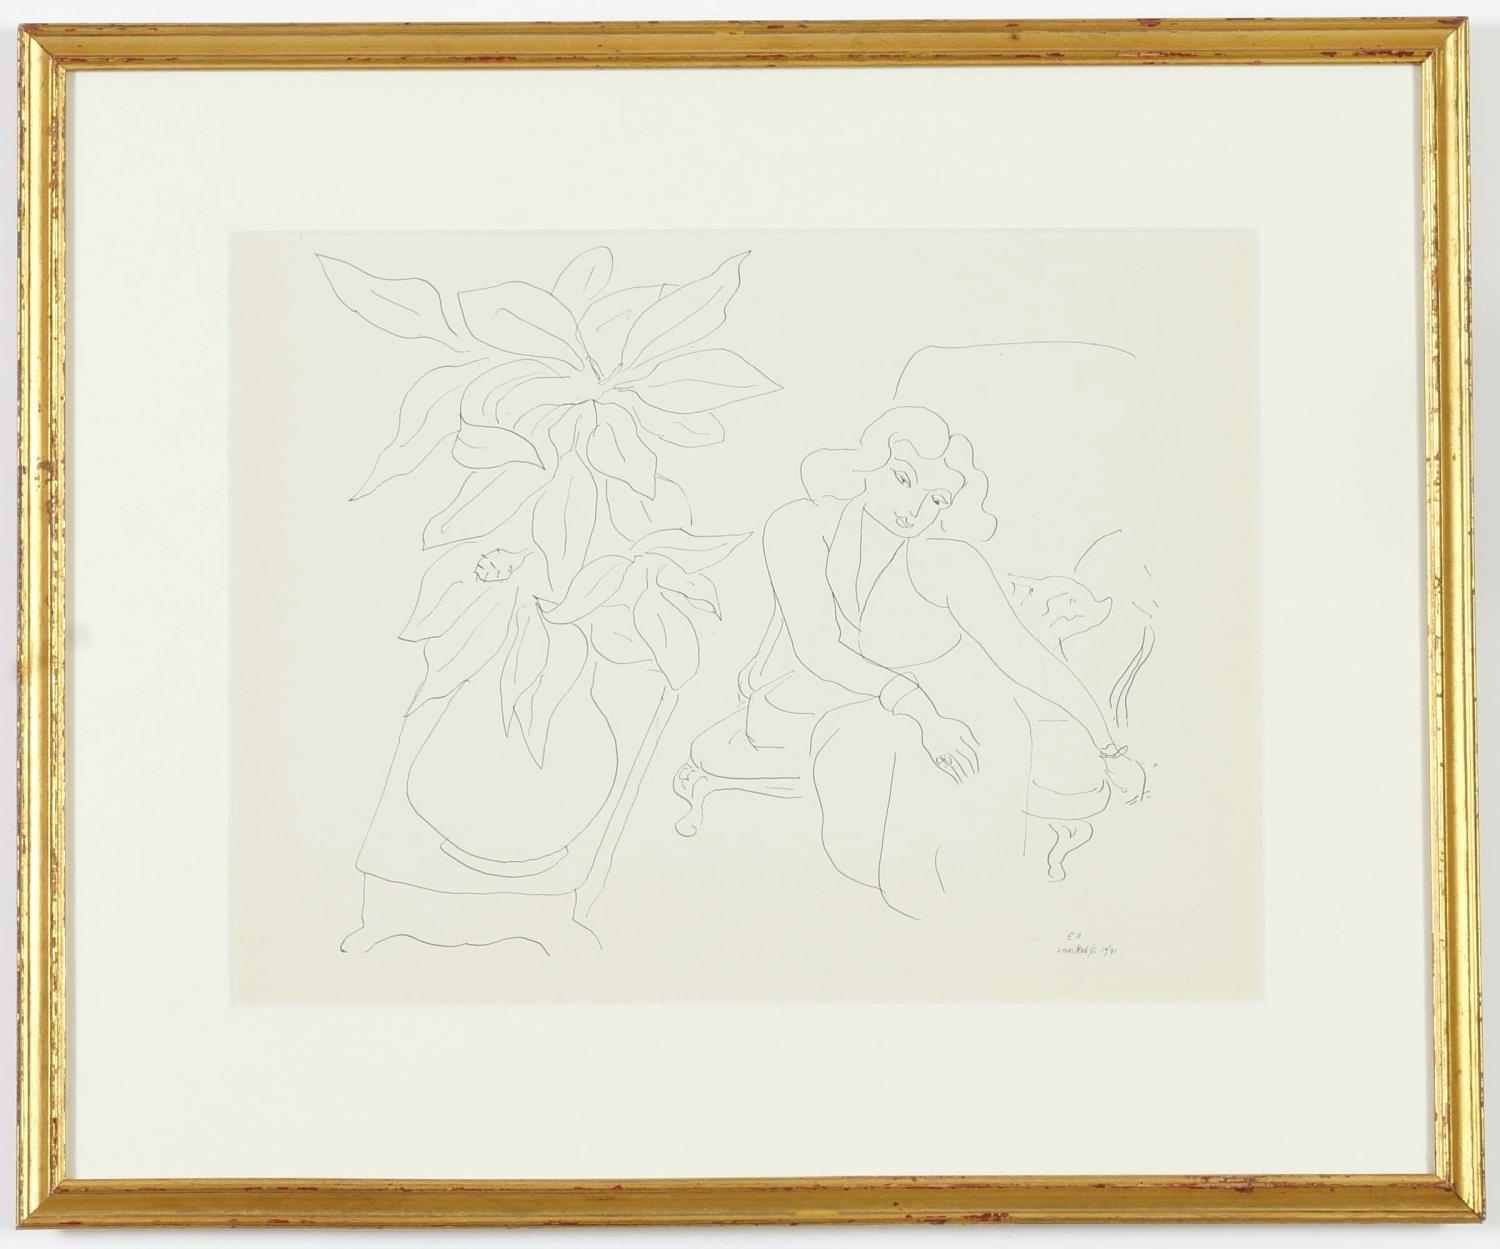 Artwork by Henri Matisse, Seated Woman, Made of collotype E11